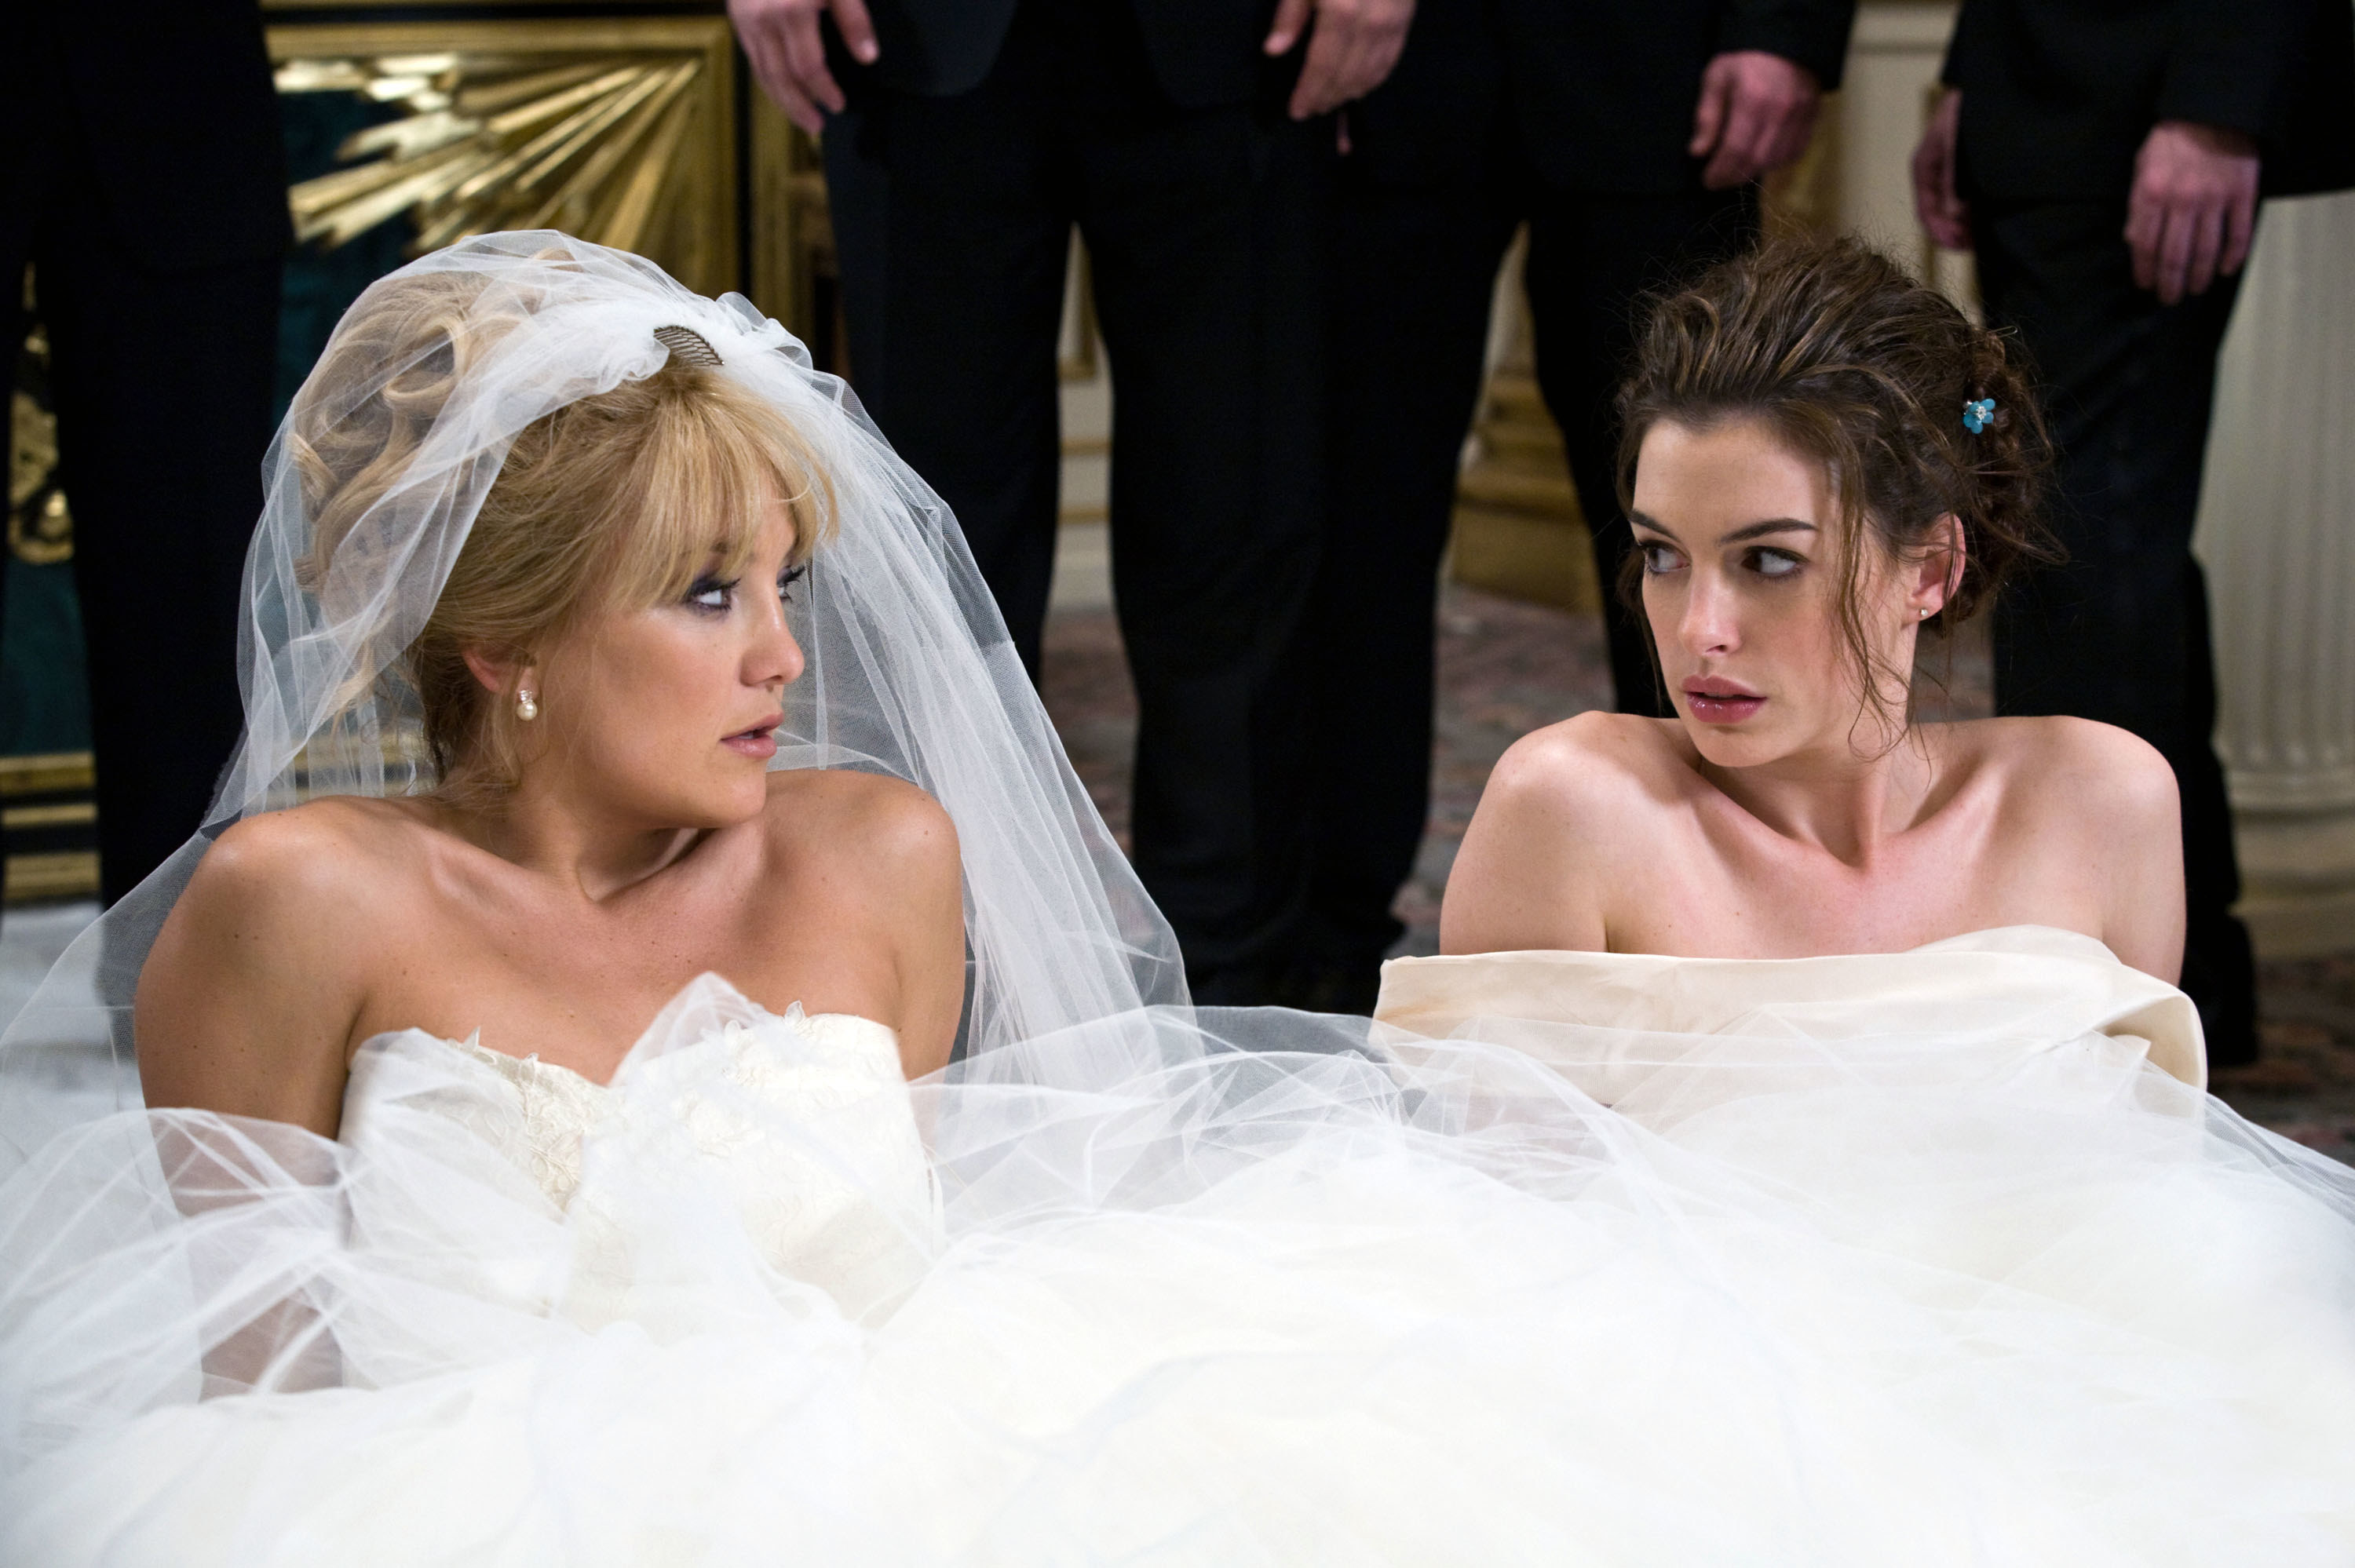 Kate Hudson, Anne Hathaway in wedding gowns sitting on the floor scowling at each other